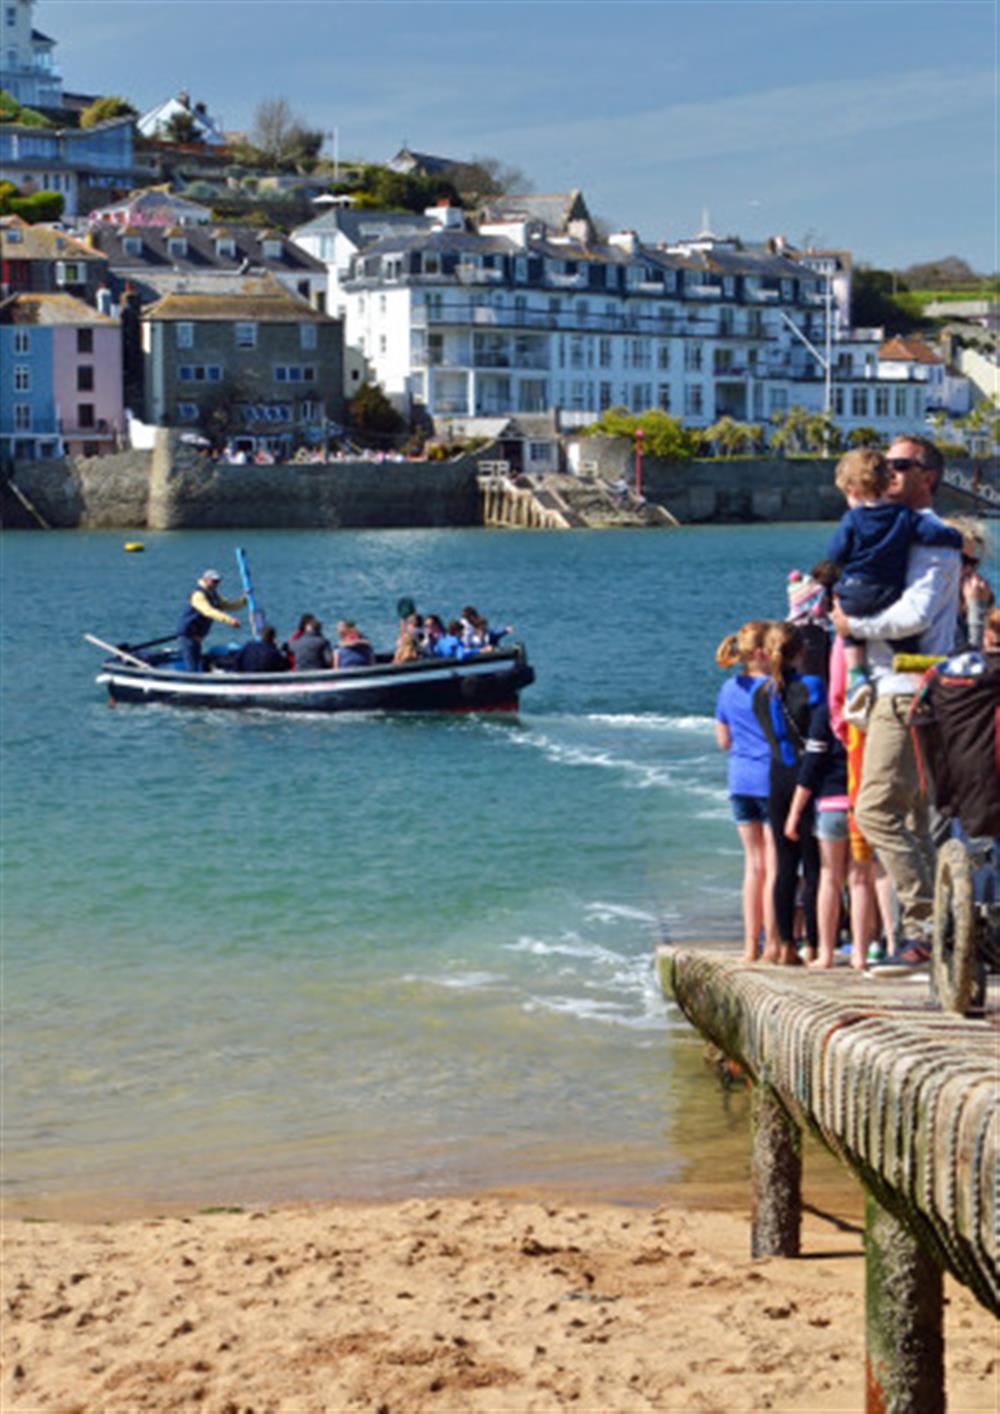 The foot ferry to Salcombe is less than a mile away.